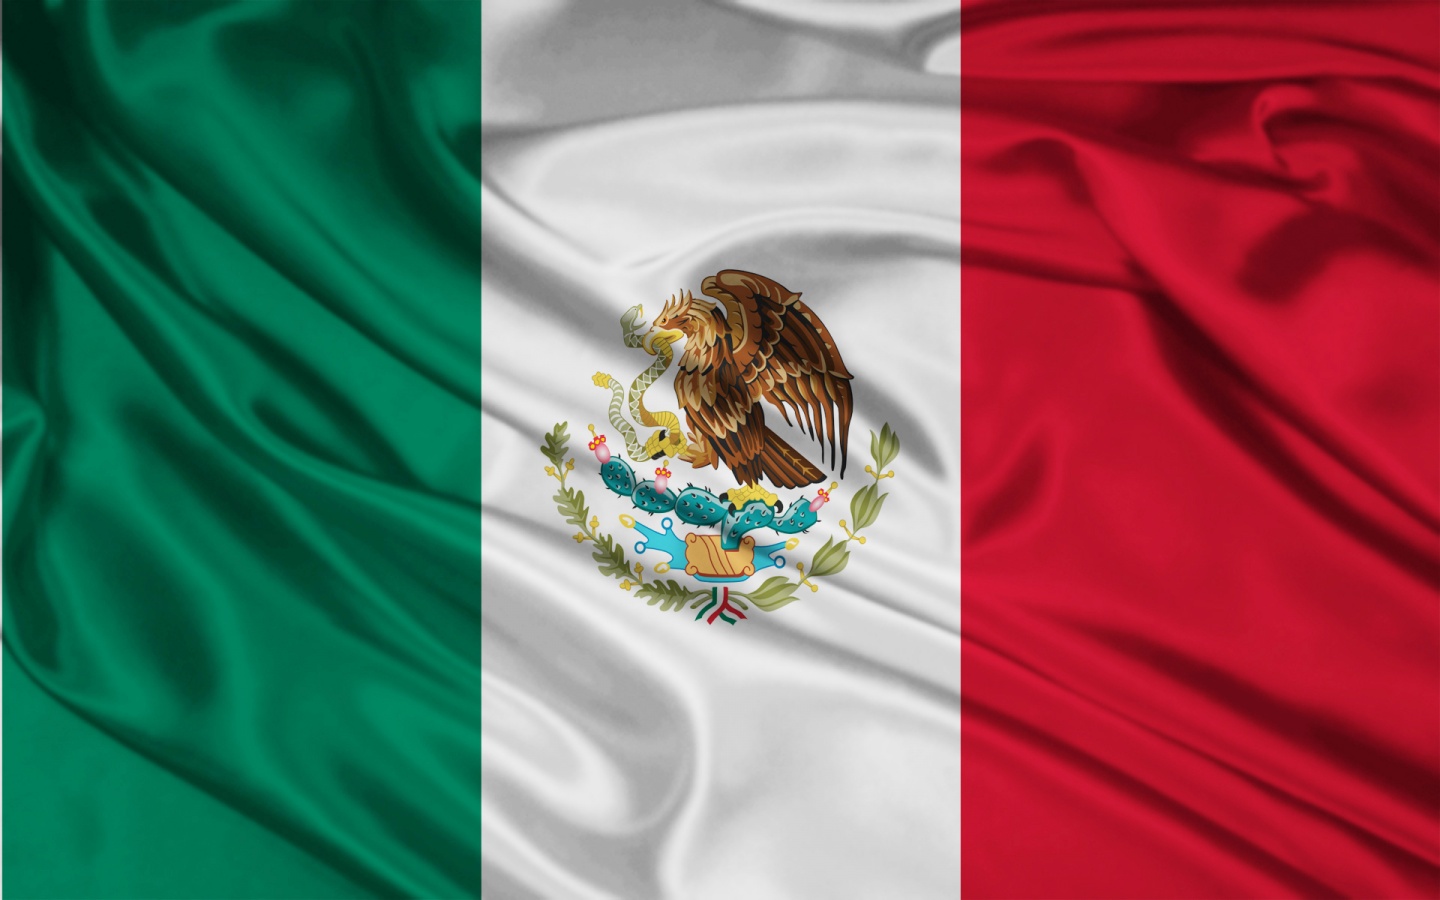 Mexico flag wallpaper iphone.